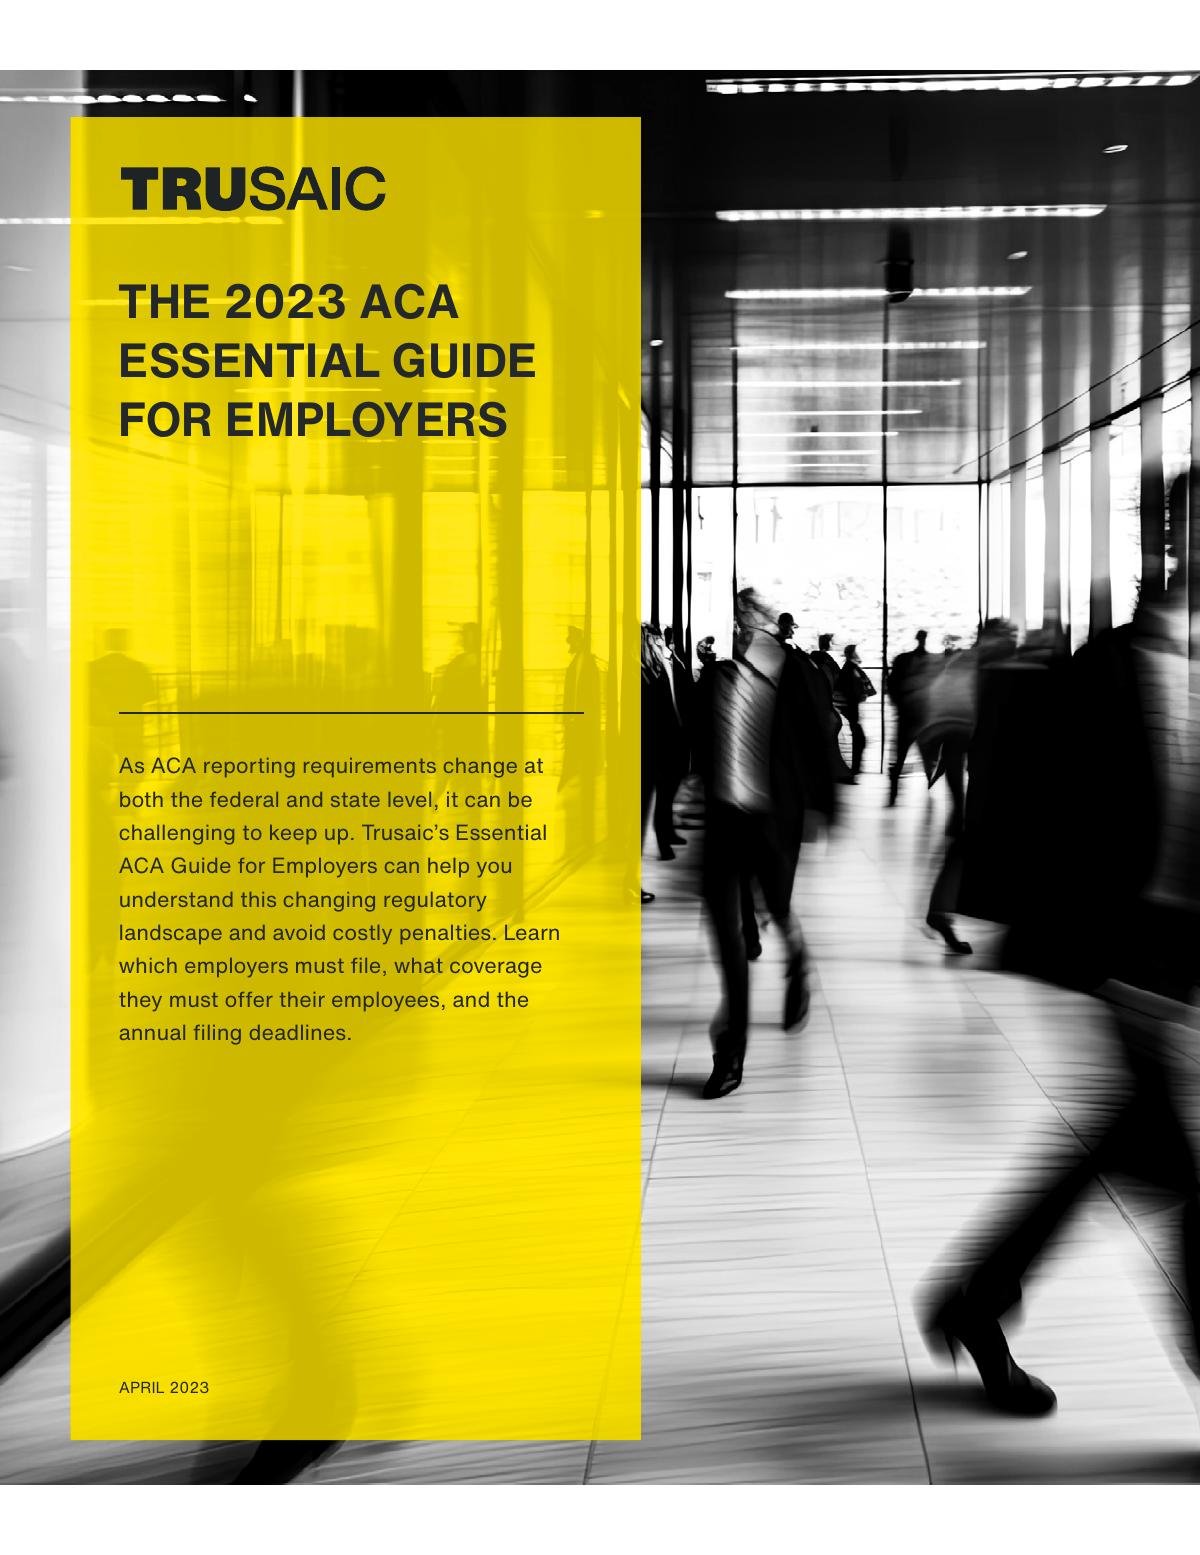 The 2023 ACA Essential Guide for Employers